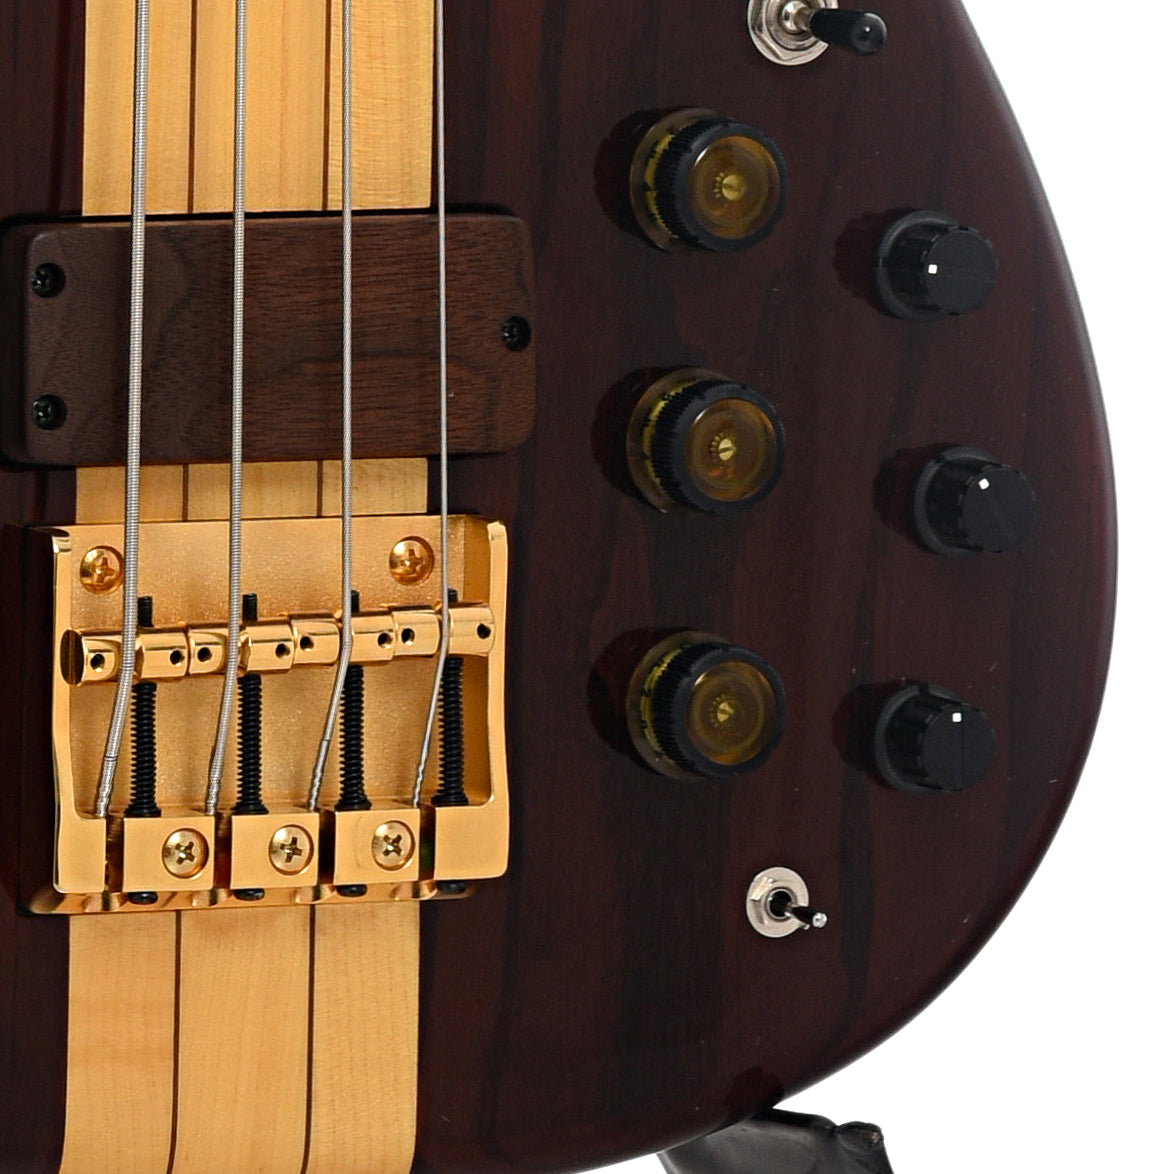 Bridge and controls for Ibanez 30th Anniversary Musician Bass